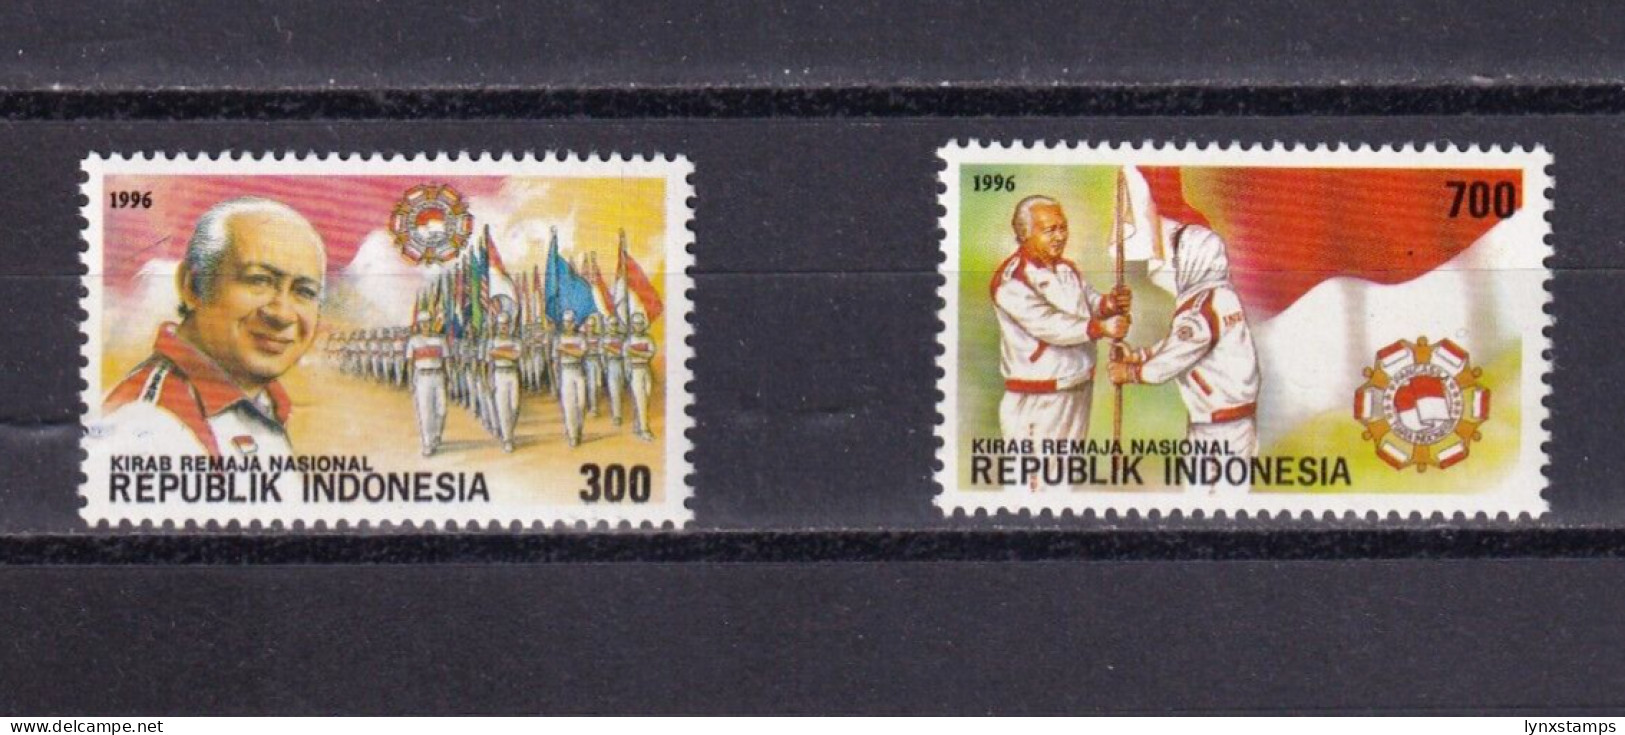 LI02 Indonesia 1996 National Youth Kirab Mint Stamps - Indonesia